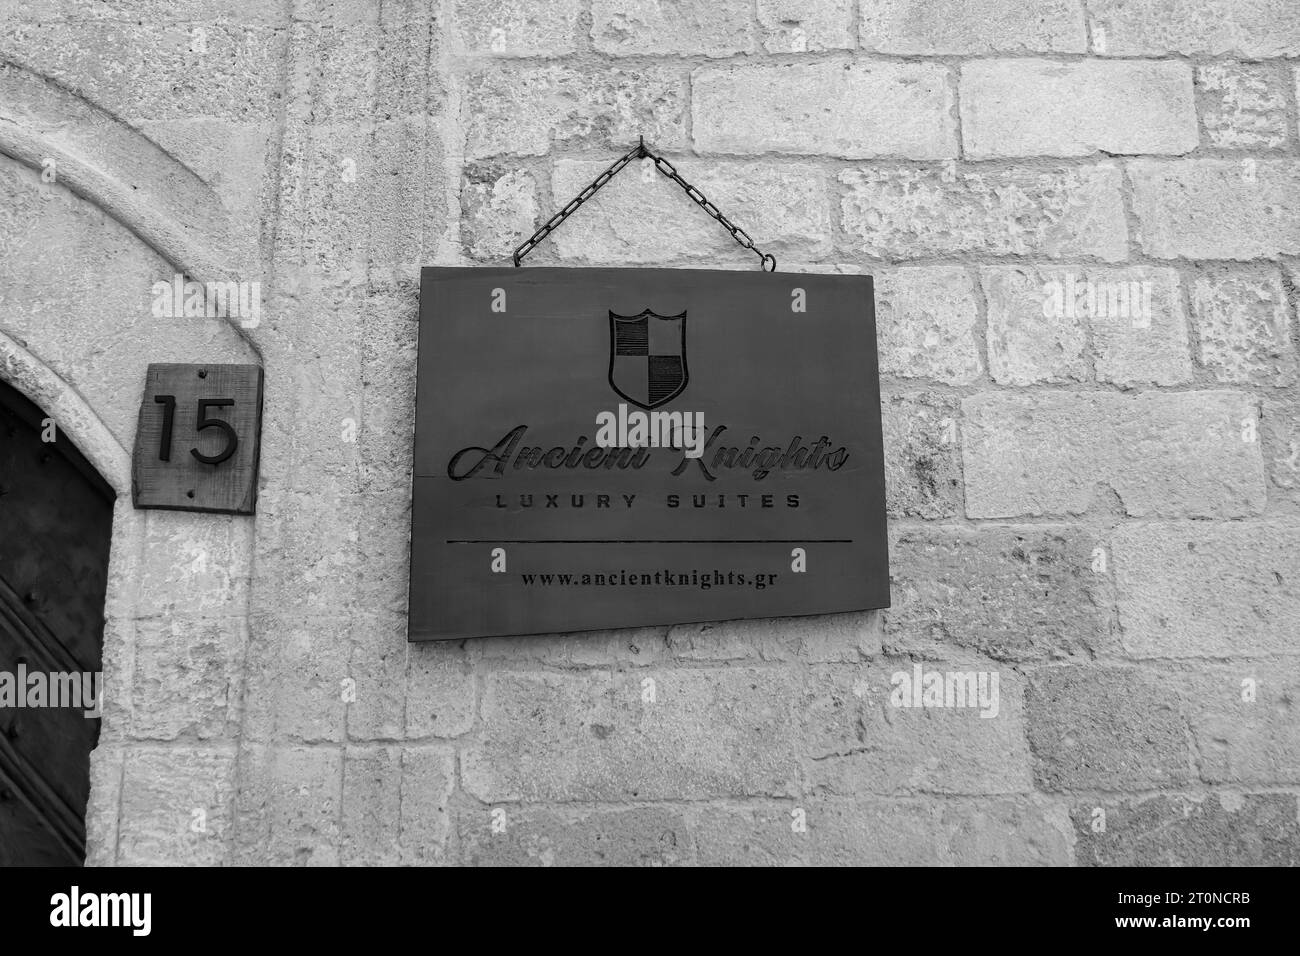 The Ancient Knights Luxury Suites accommodations wooden entrance hanging sign at the Rhodes, Old Town rental property in black and white Stock Photo